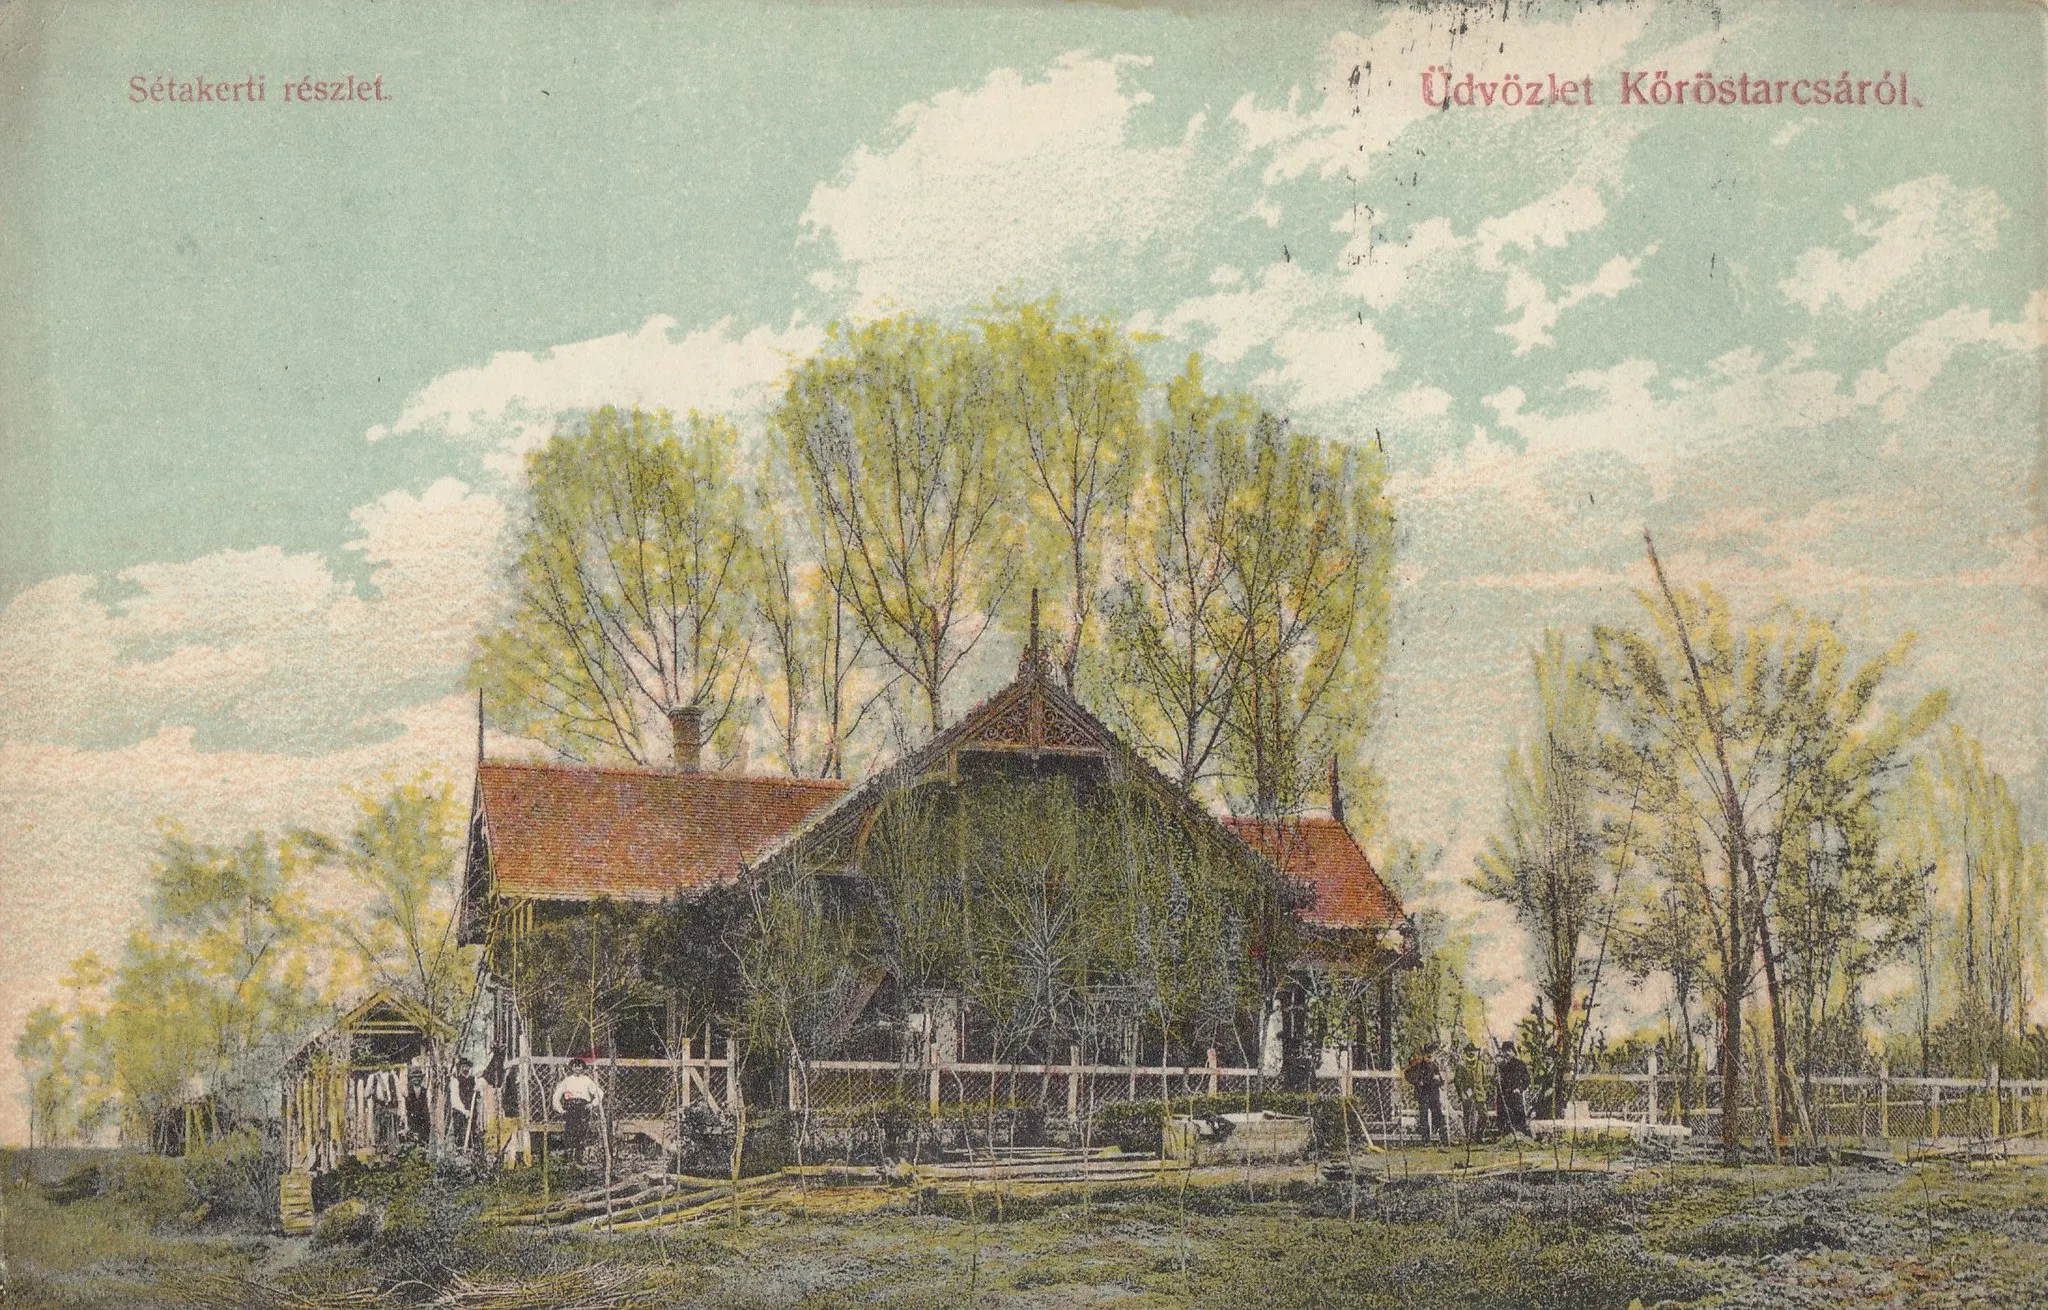 Photo showing: coloured picturecard from the 1900's